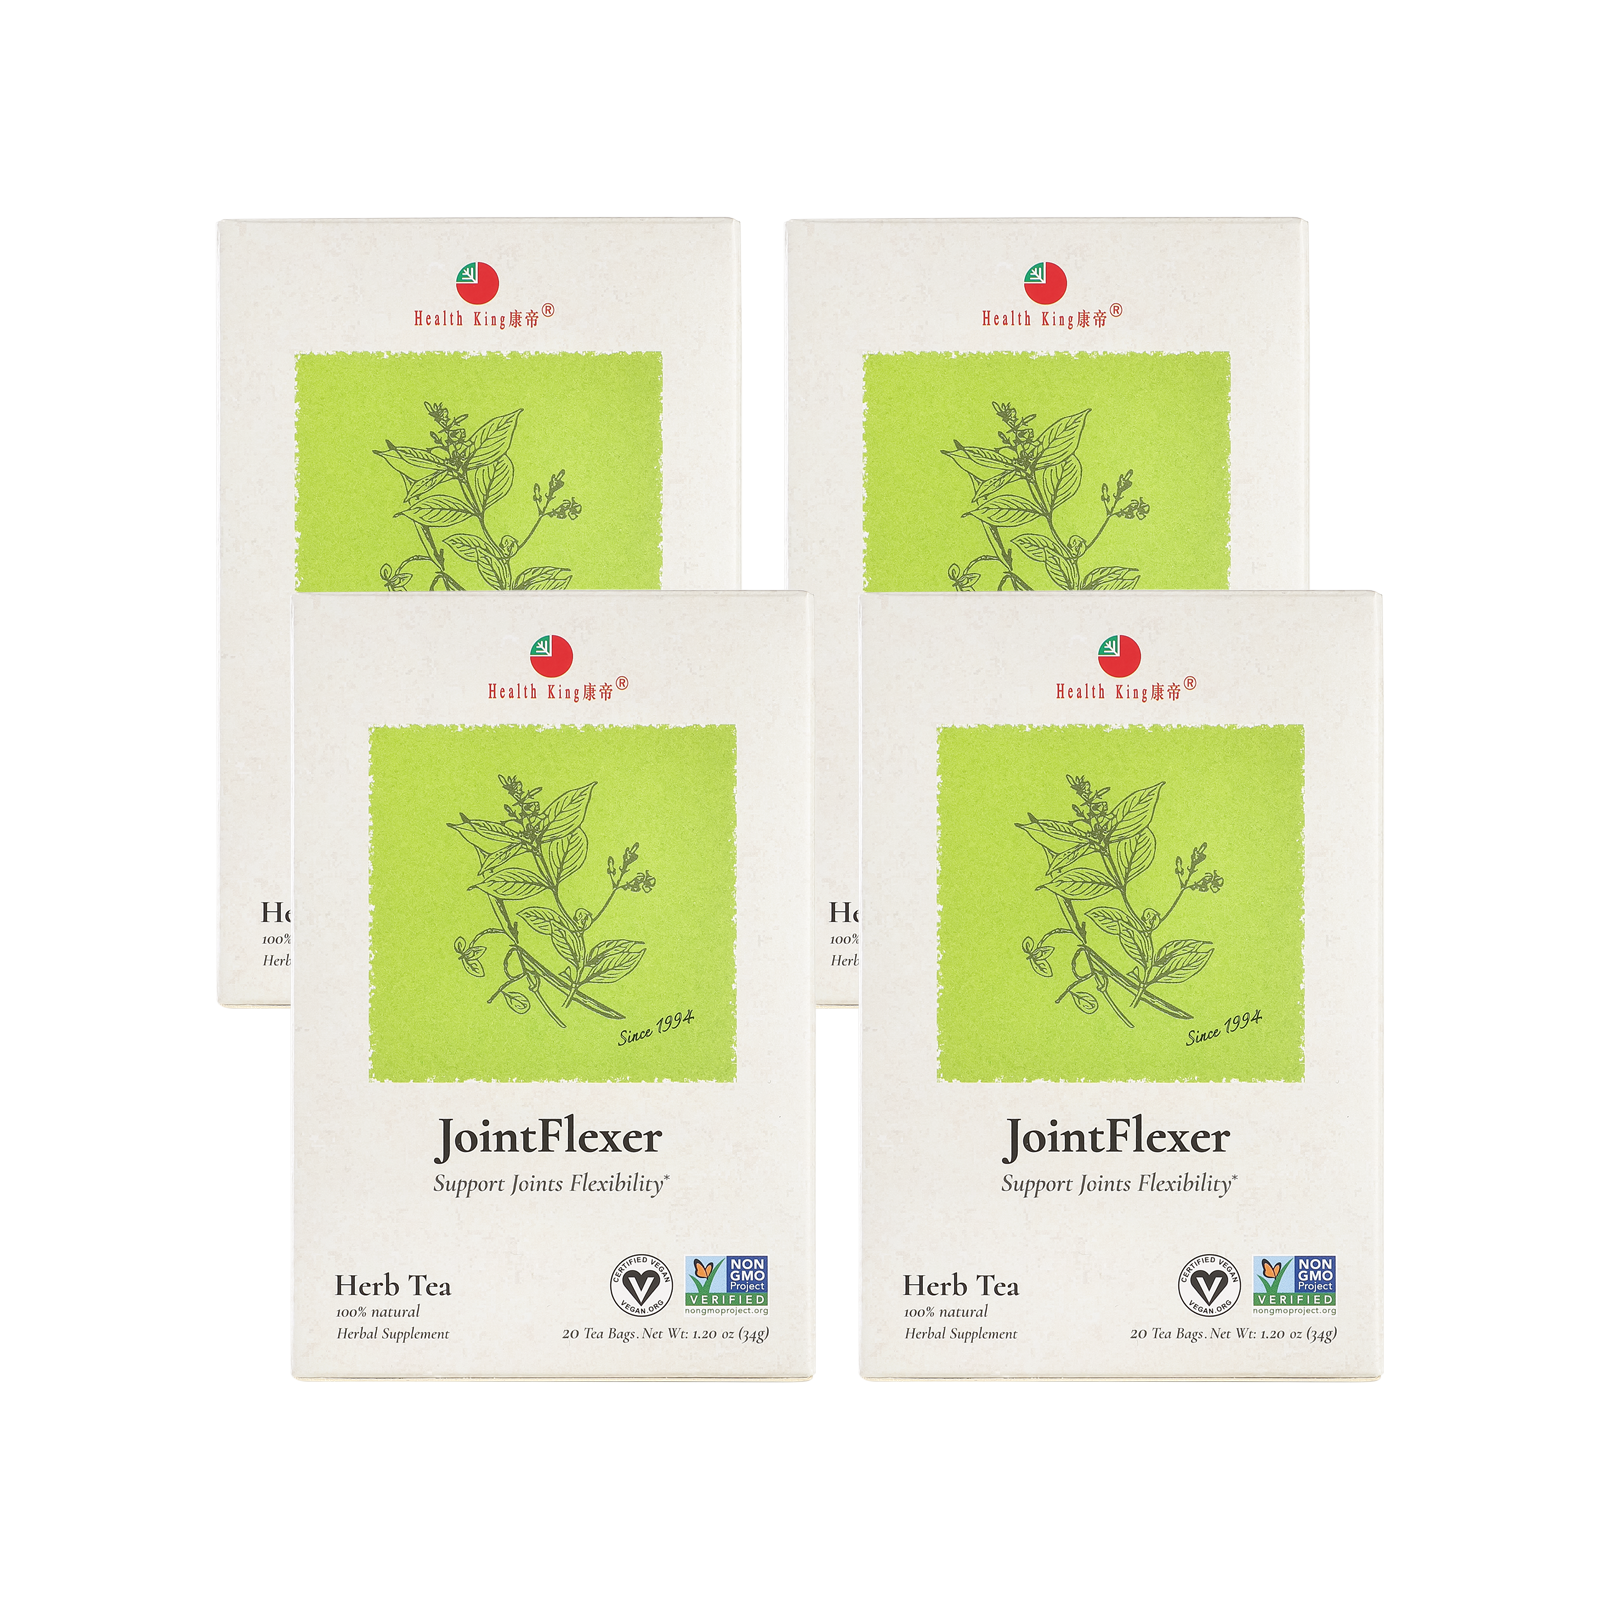 Four packs of JointFlexer Herb Tea for promoting joint health